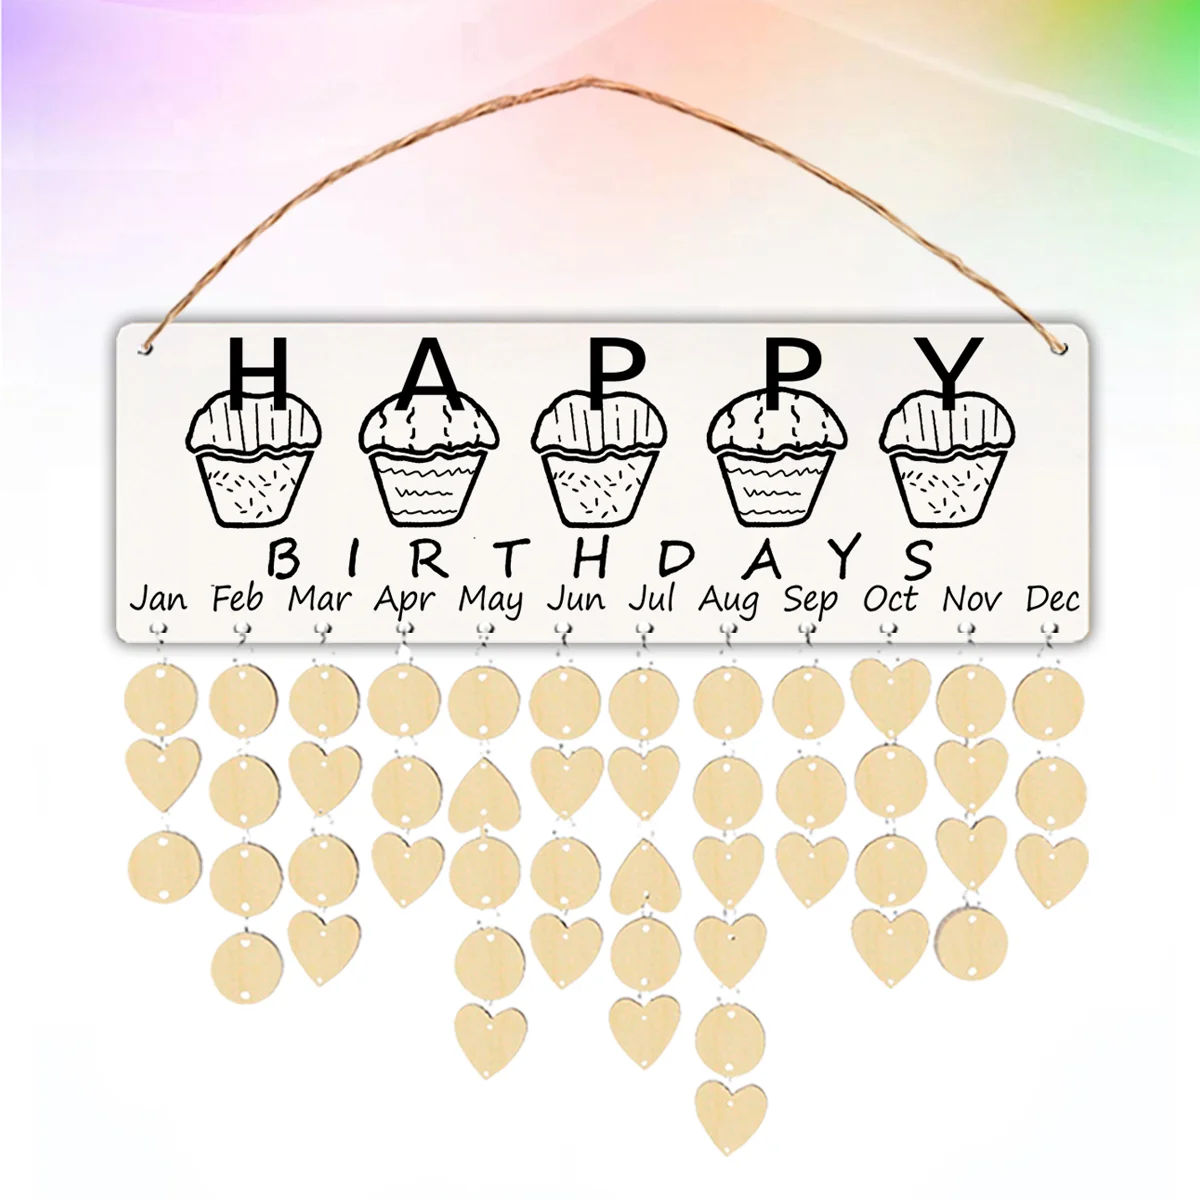 Wooden Birthday Reminder Board DIY Dates Reminder Sign Rope Hanging Events Anniversary Celebration Calendar Wall Plaque with metatron seven star formation wooden divination pendulum board meditation metaphysical altar crystal base mat wall decor sign